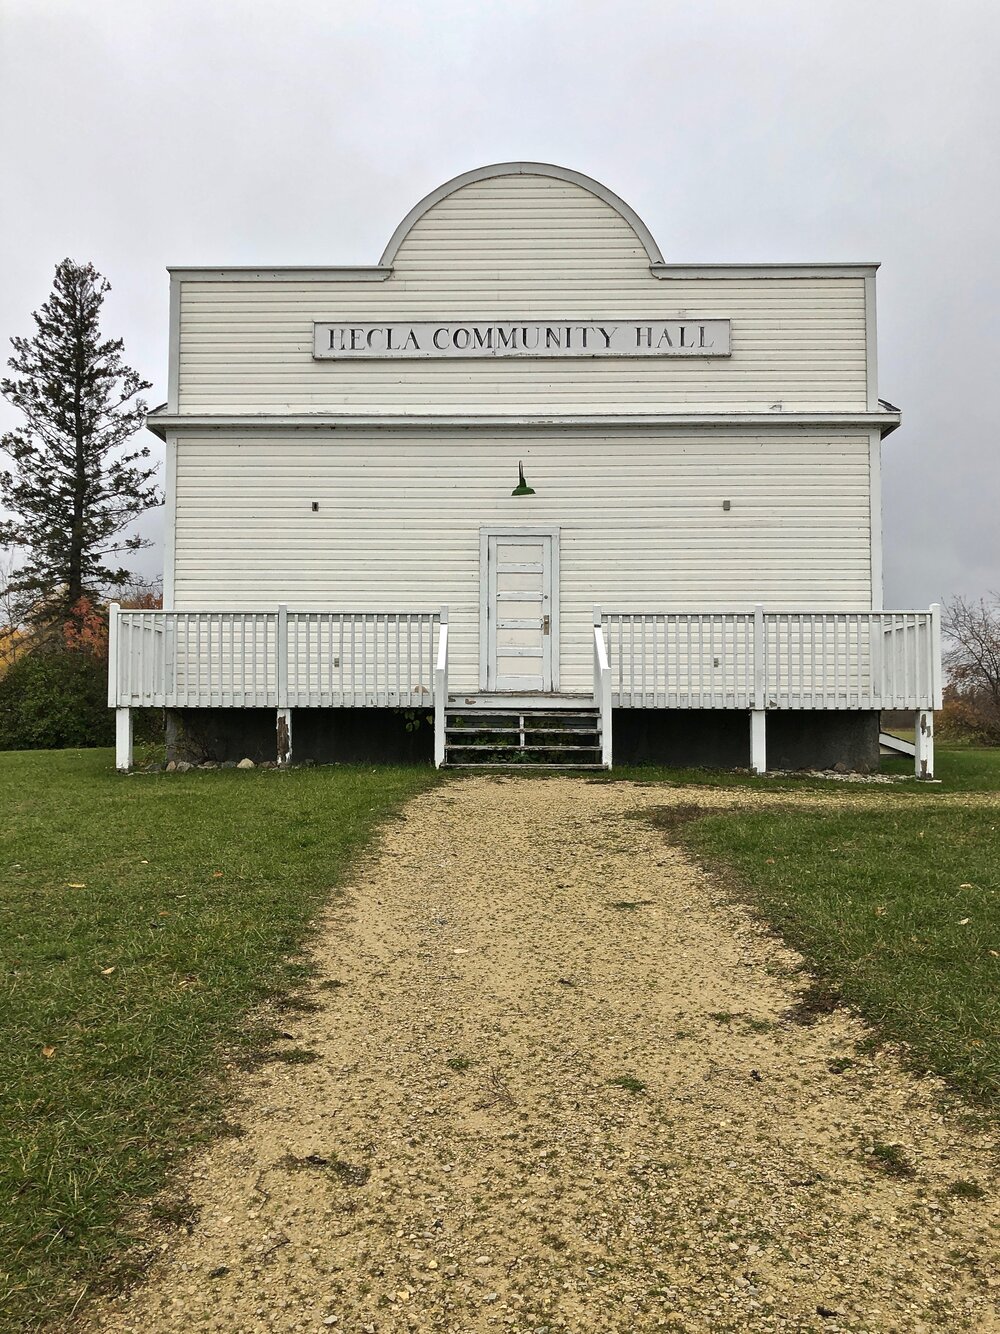 The town hall in Hecla, Manitoba.